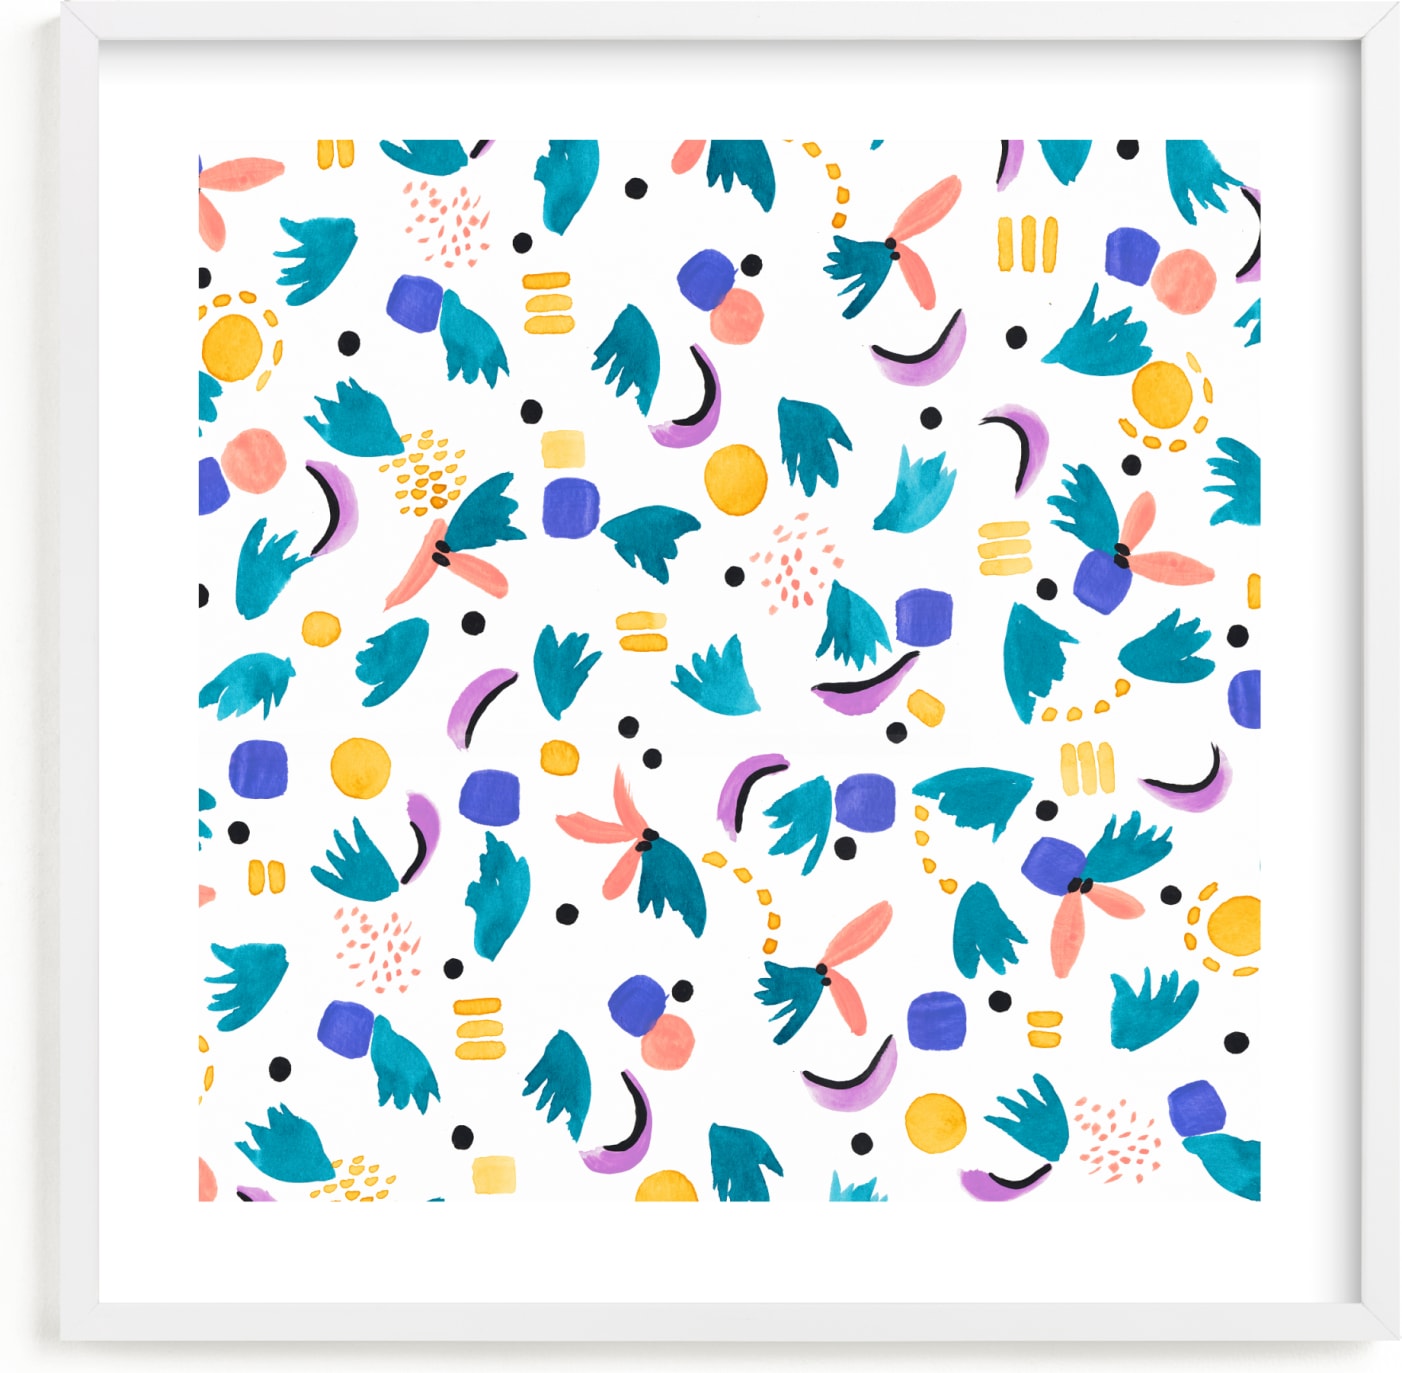 This is a colorful, classic colors kids wall art by FERNANDA MARTINEZ called Geometric plants.